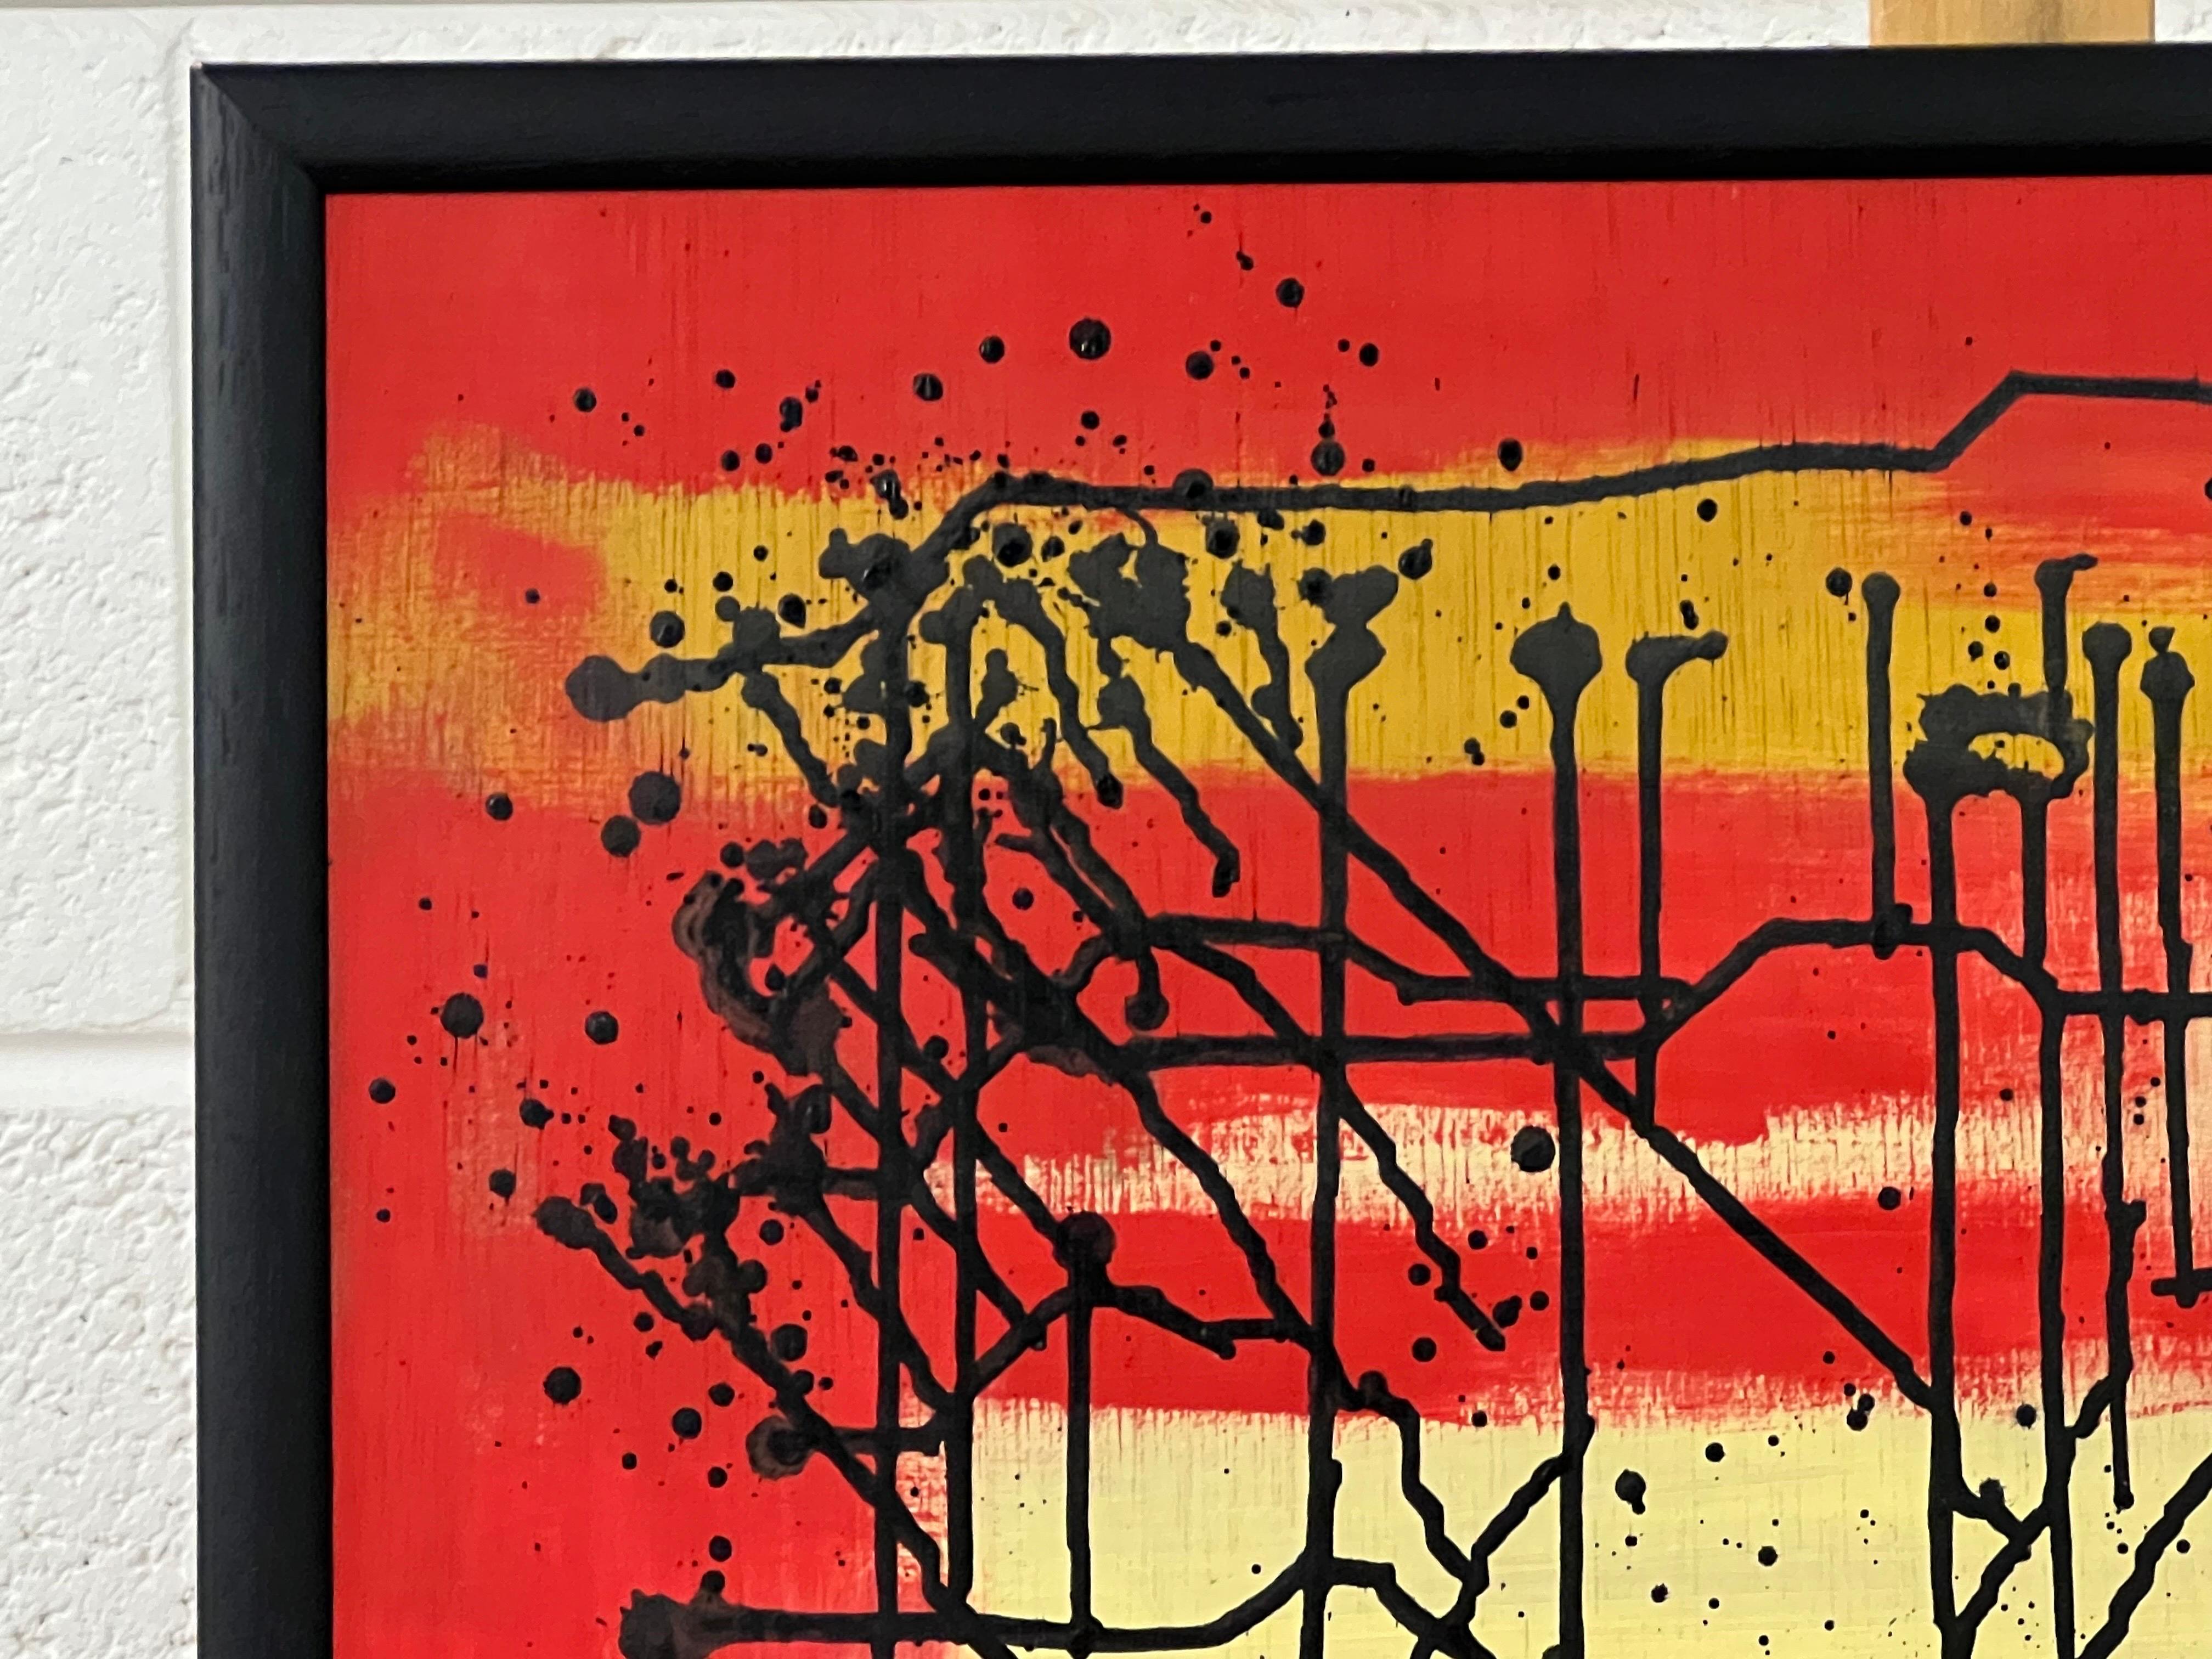 'Fractured Mind' - Abstract Painting on Board by British Urban Graffiti Artist, Chris Pegg, using red, black & golden yellow. Chris Pegg is a self-taught Street Artist producing artwork with a strong social commentary. 

Art measures 24 x 24 inches